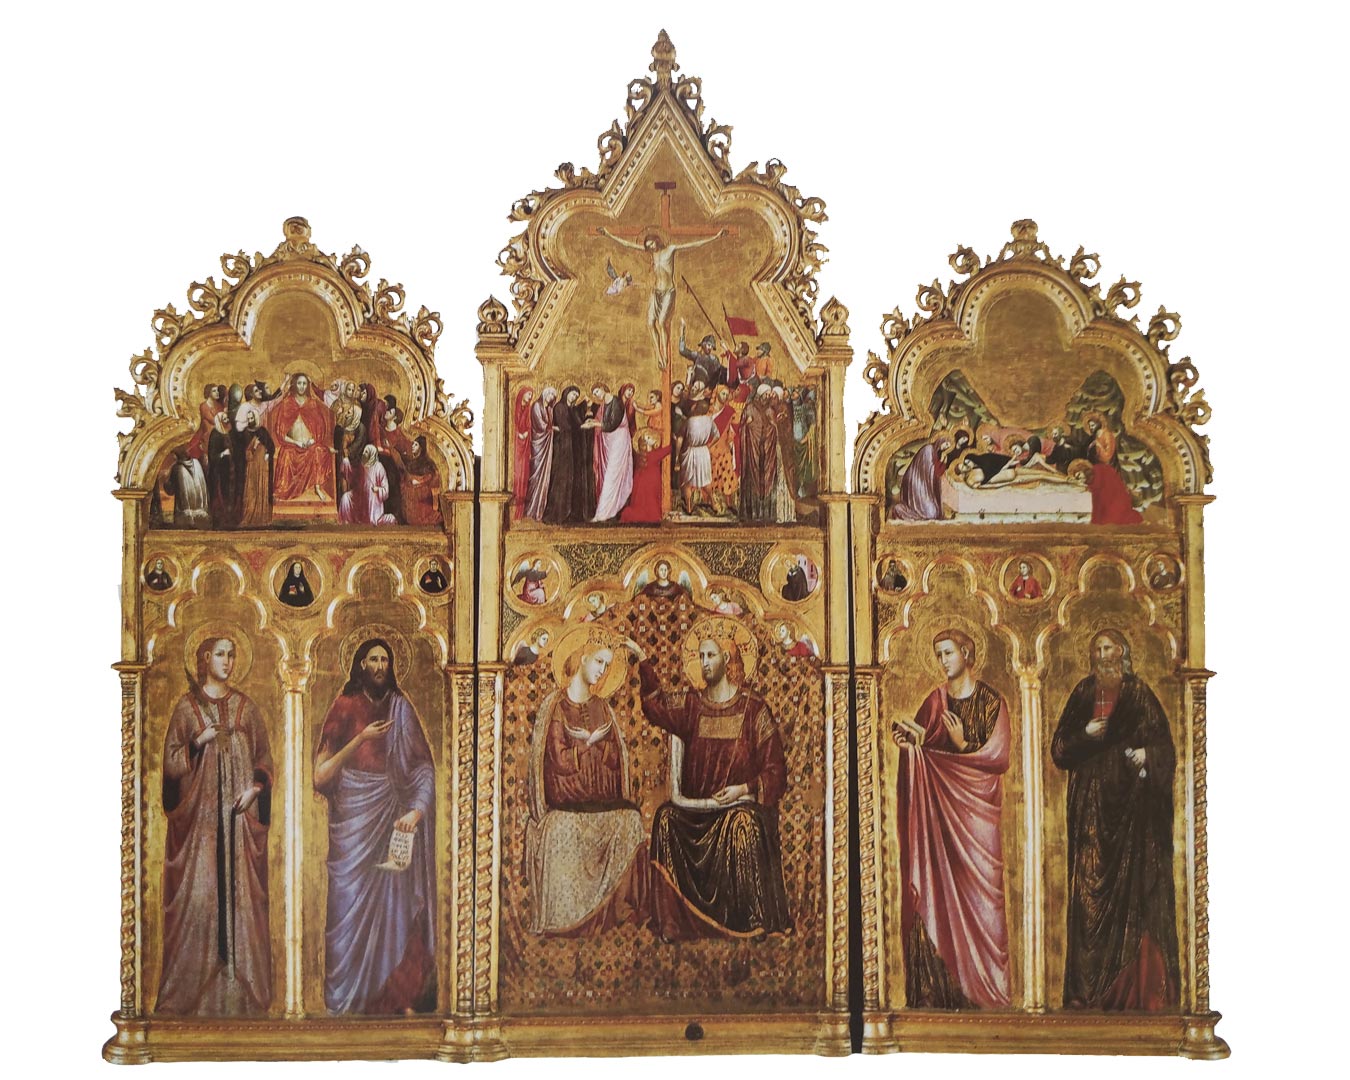 Giuliano da Rimini Polyptych with the Coronation of the Virgin, Four Saints and Scenes from the Passion (c. 1320; panel, 190.5 x 205 cm; Rimini, City Museum)